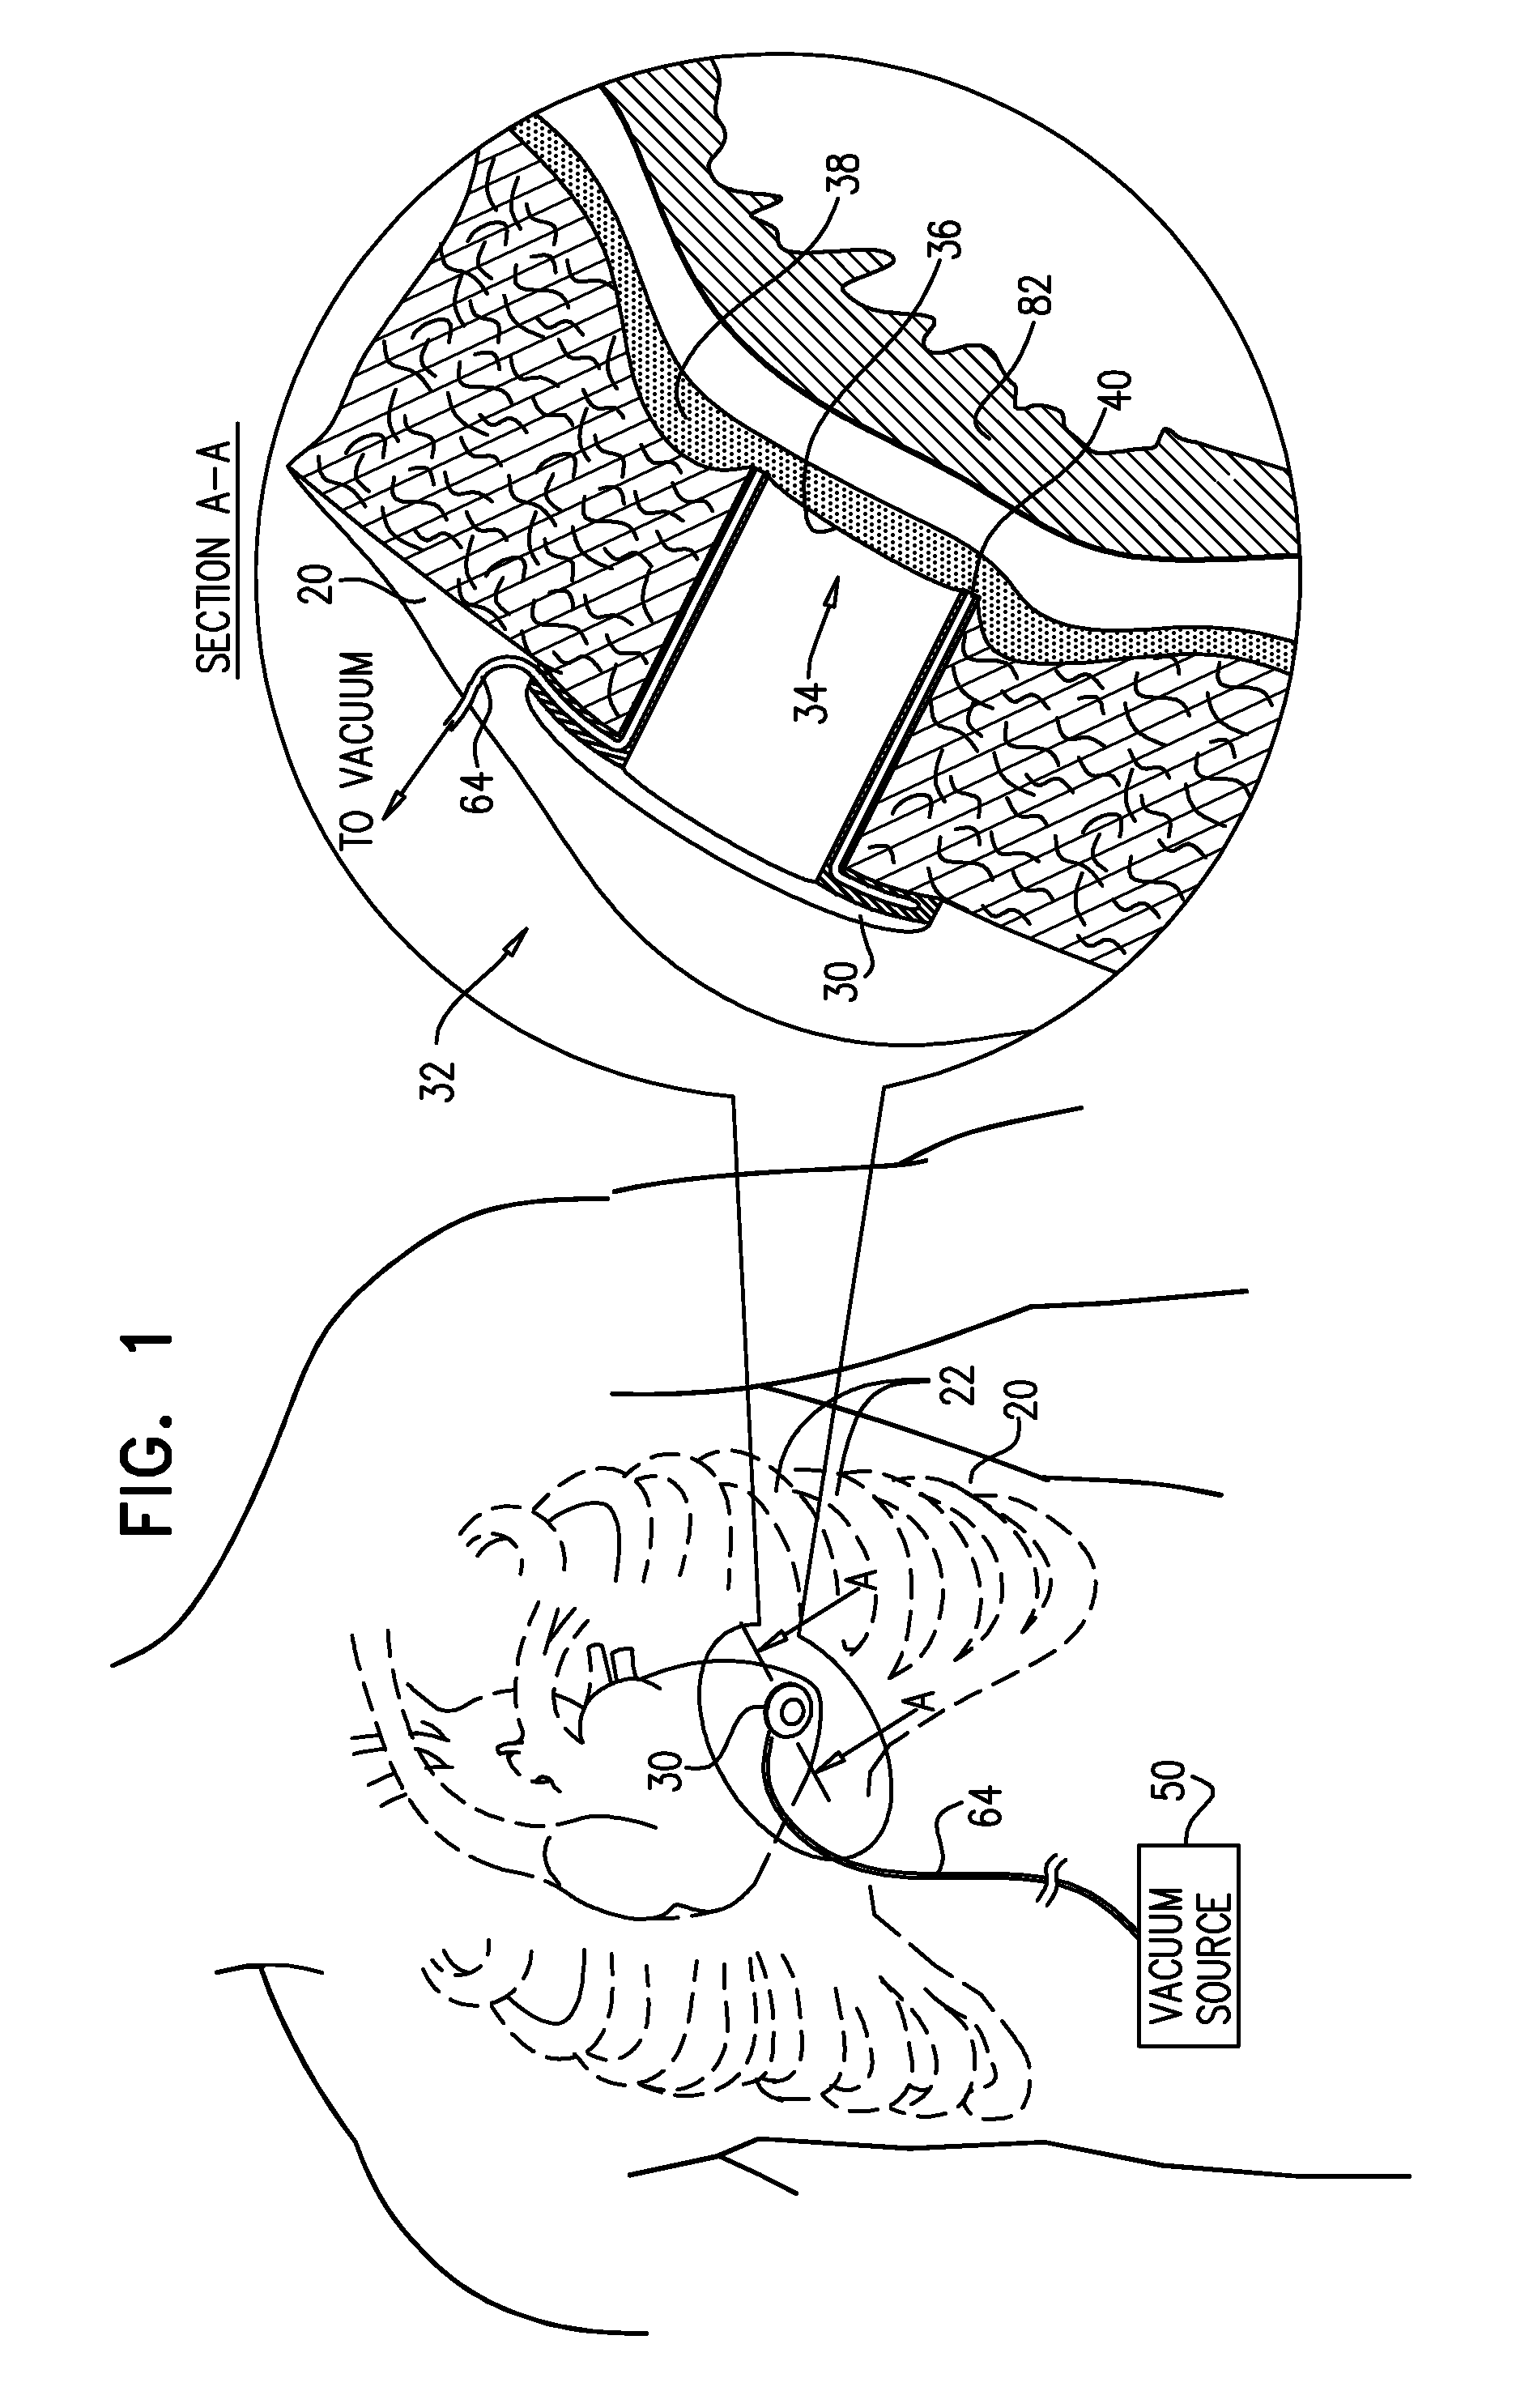 Surgical techniques and closure devices for direct cardiac catheterization